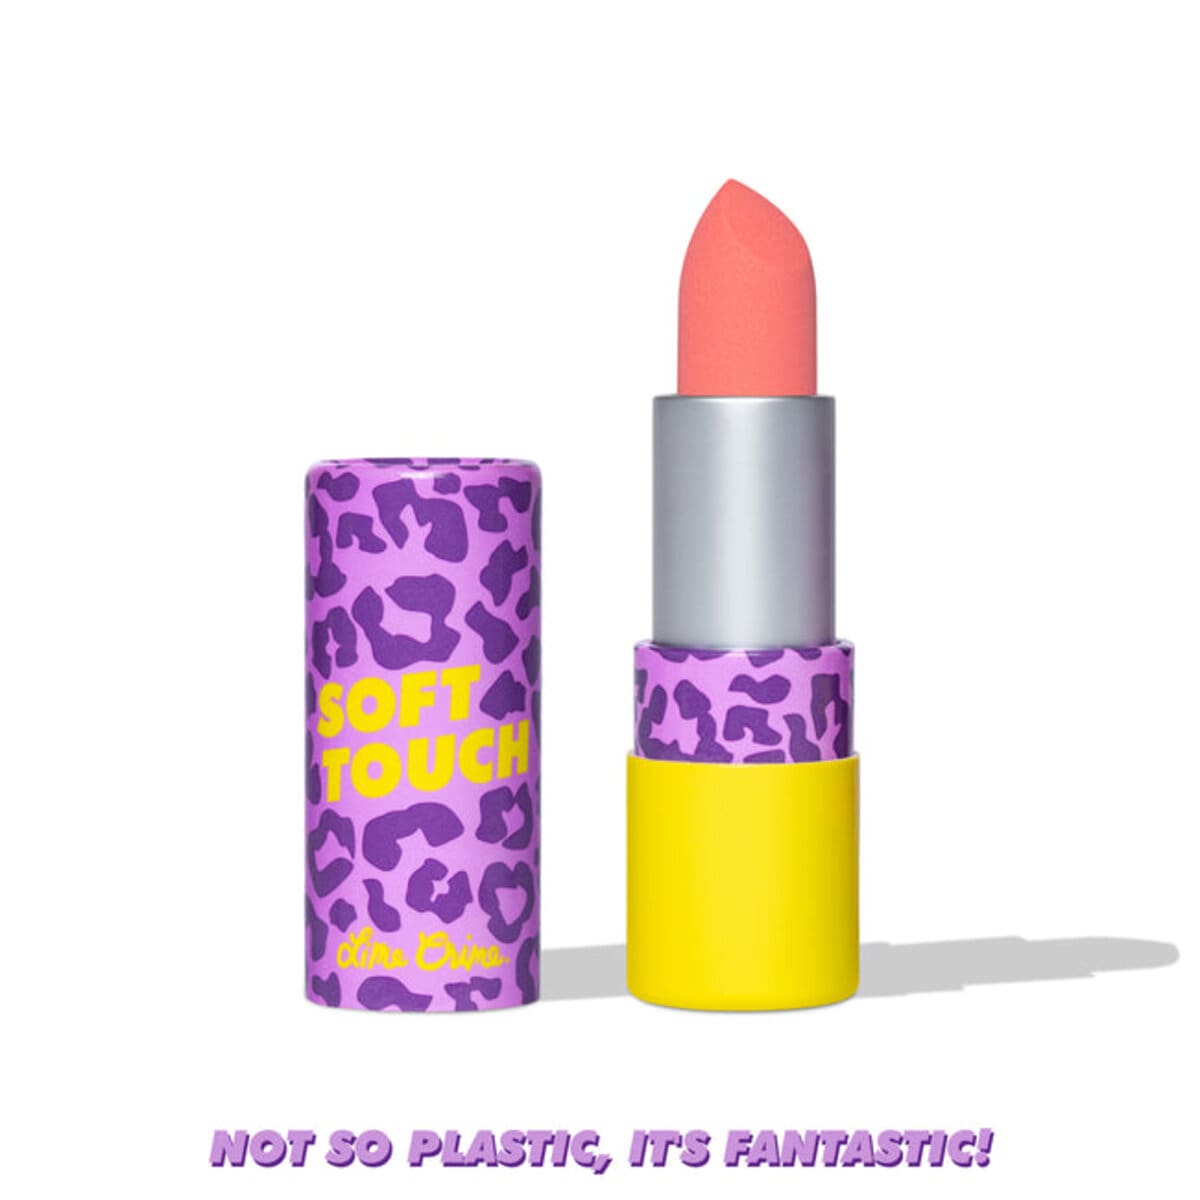 SOFT TOUCH PUNKED UP PEACH - LIME CRIME